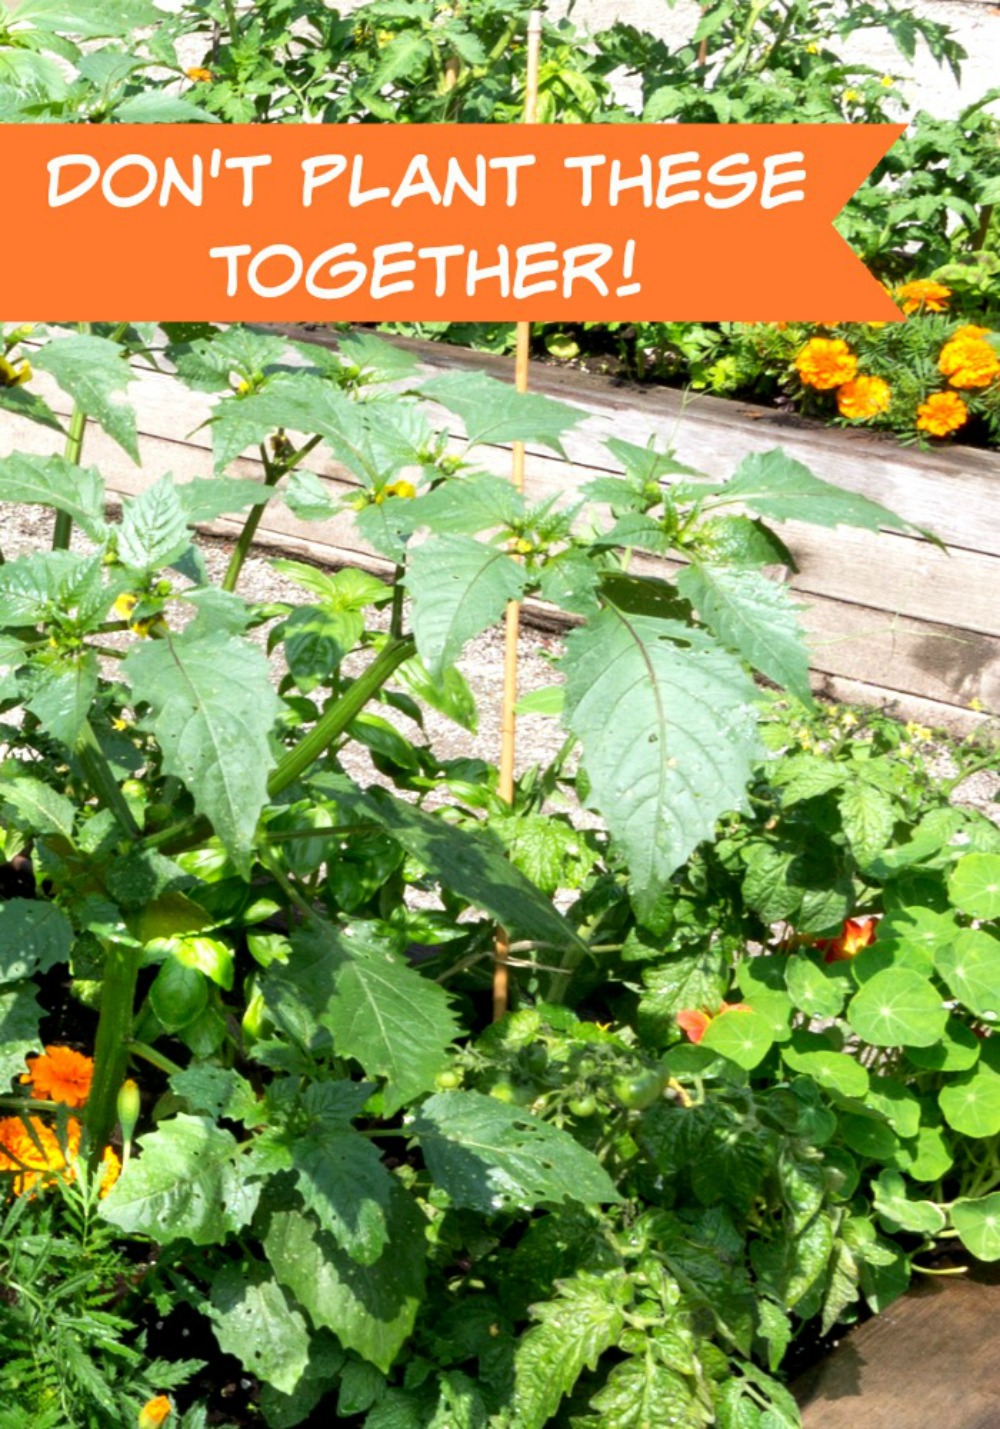 Companion Planting Part 2 - Don't Plant These Together Too